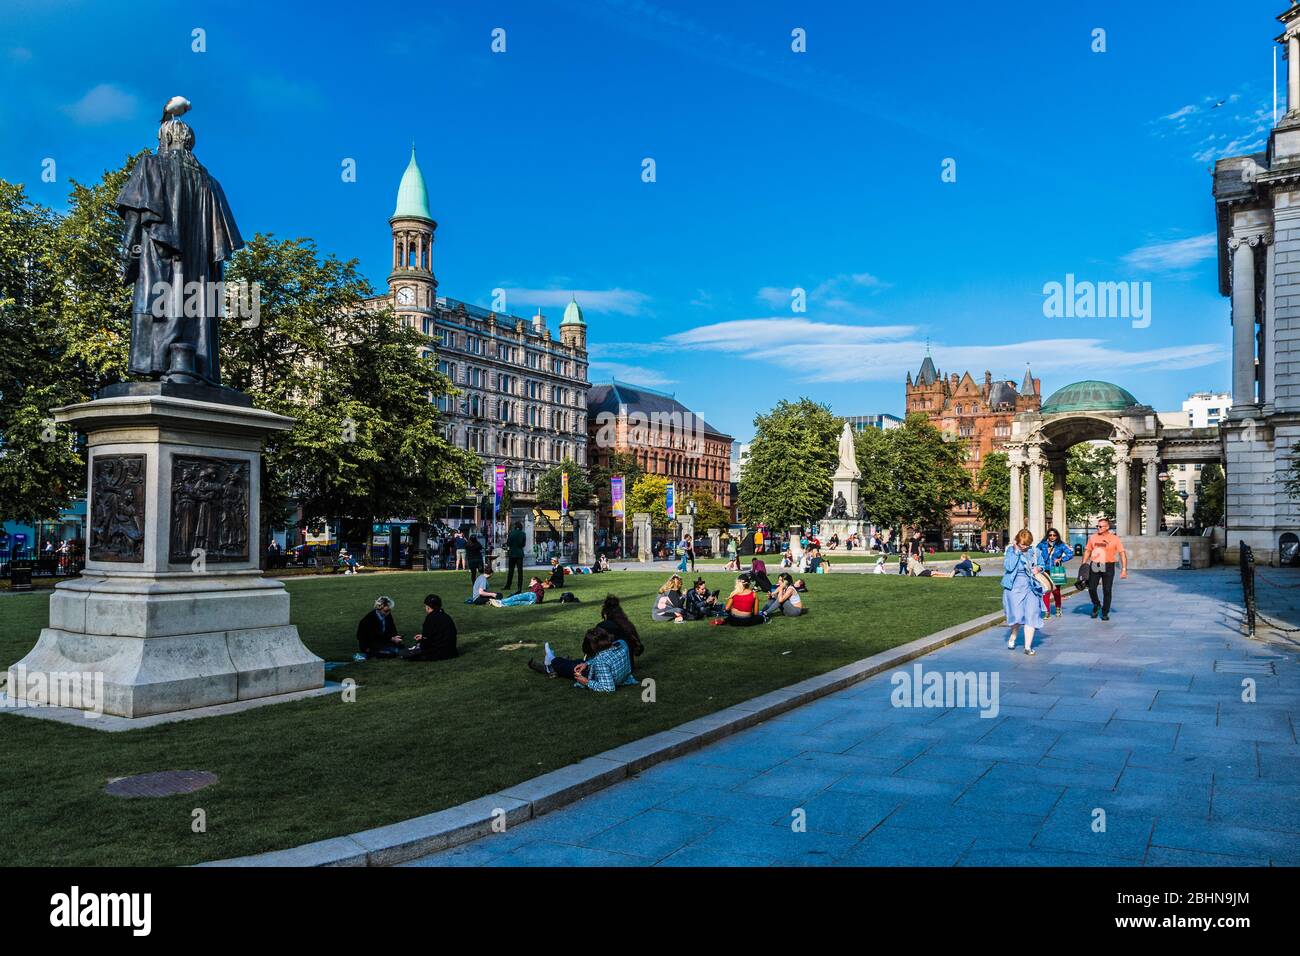 Park with many people lying on the meadows in front of City Hall in Belfast, United Kingdom. Belfast is the capital of northern Ireland. Stock Photo